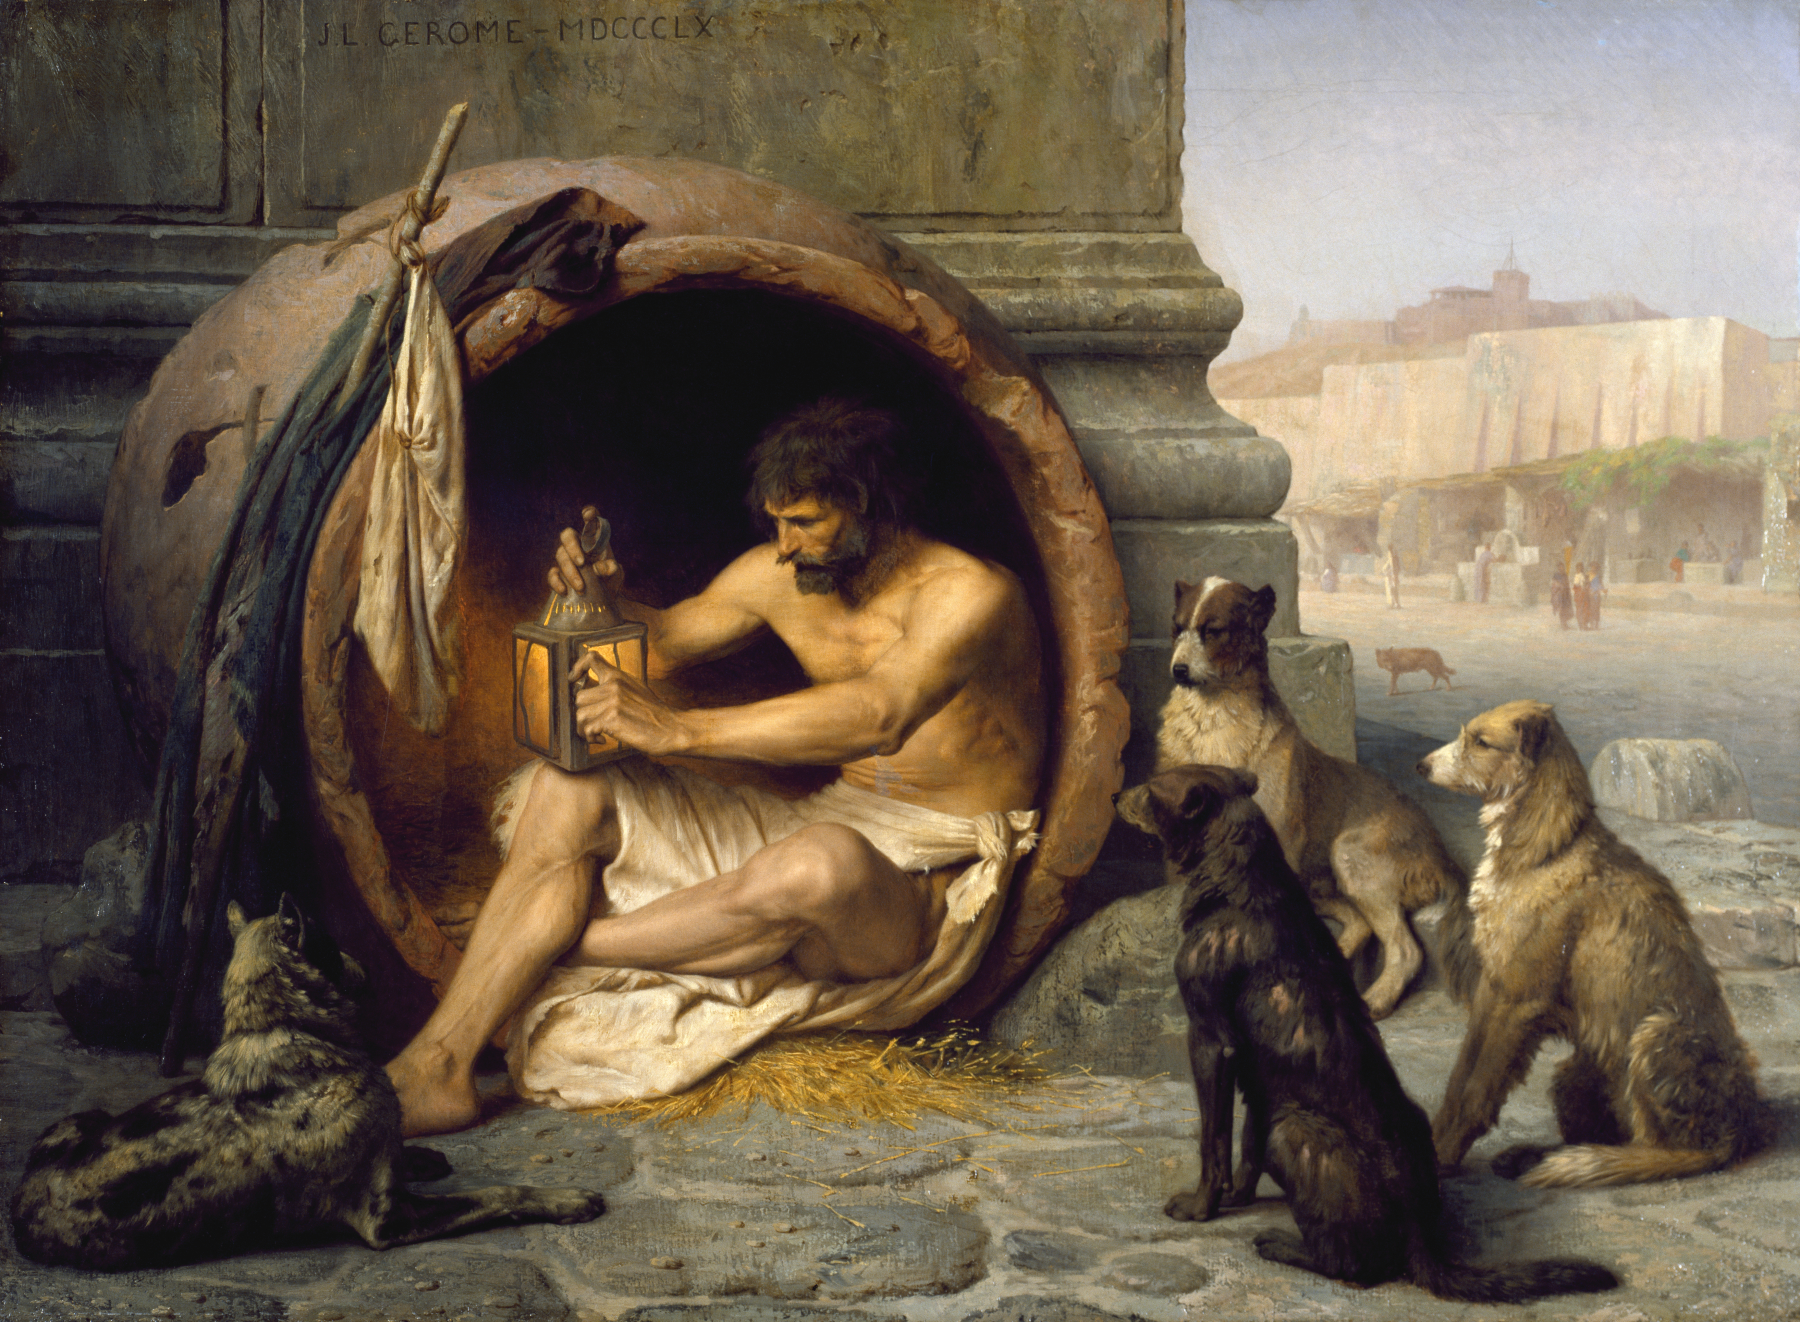 A man sits in an enclosed circular structure with a few dogs surrounding him.